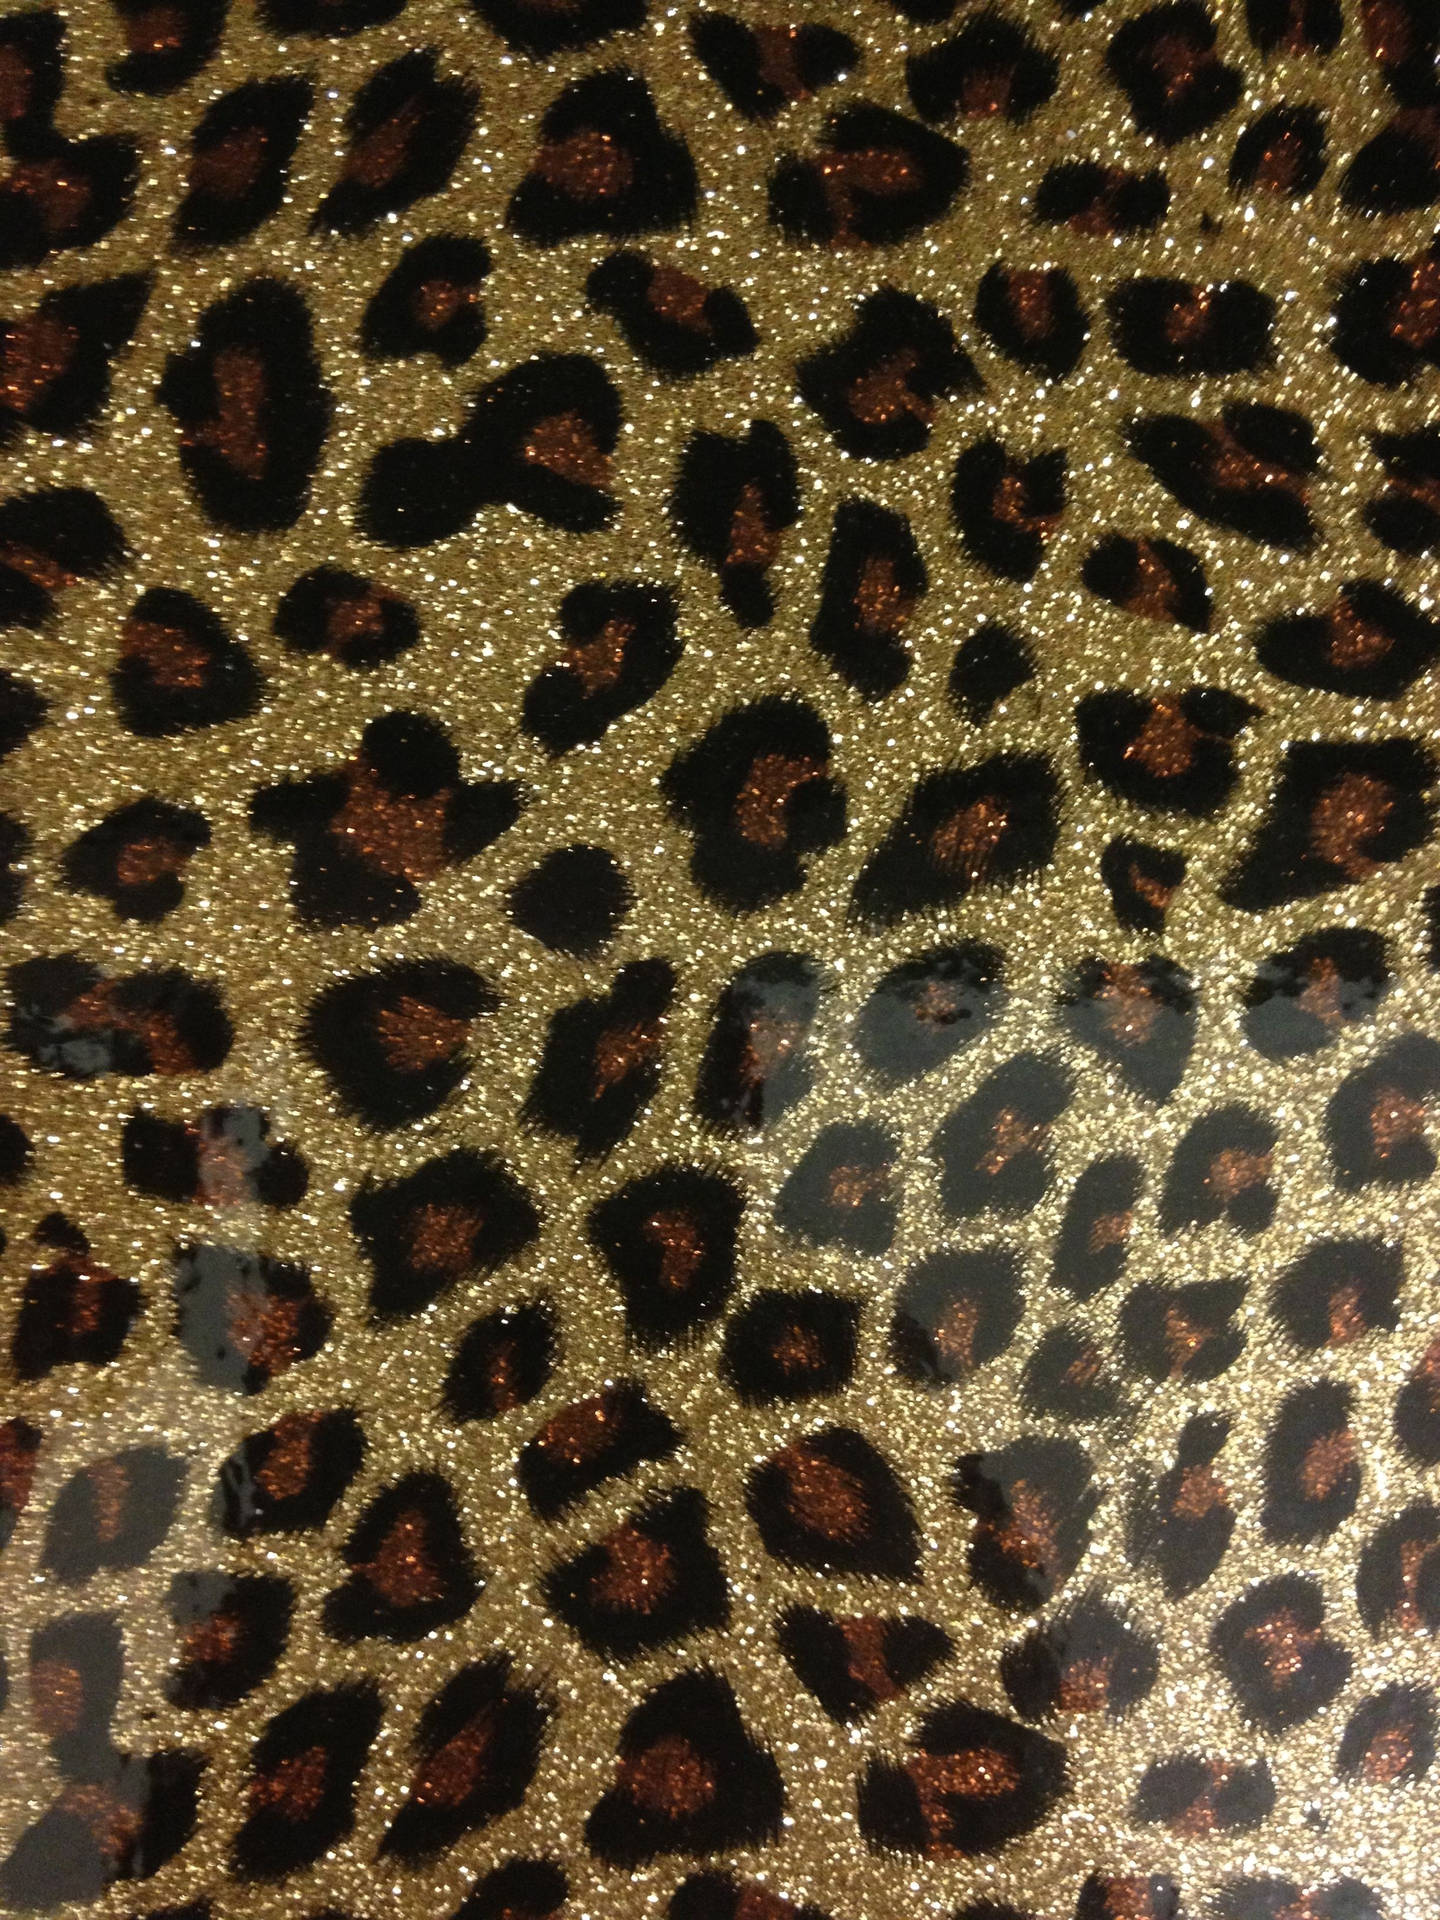 Leopard Print 2448X3264 Wallpaper and Background Image